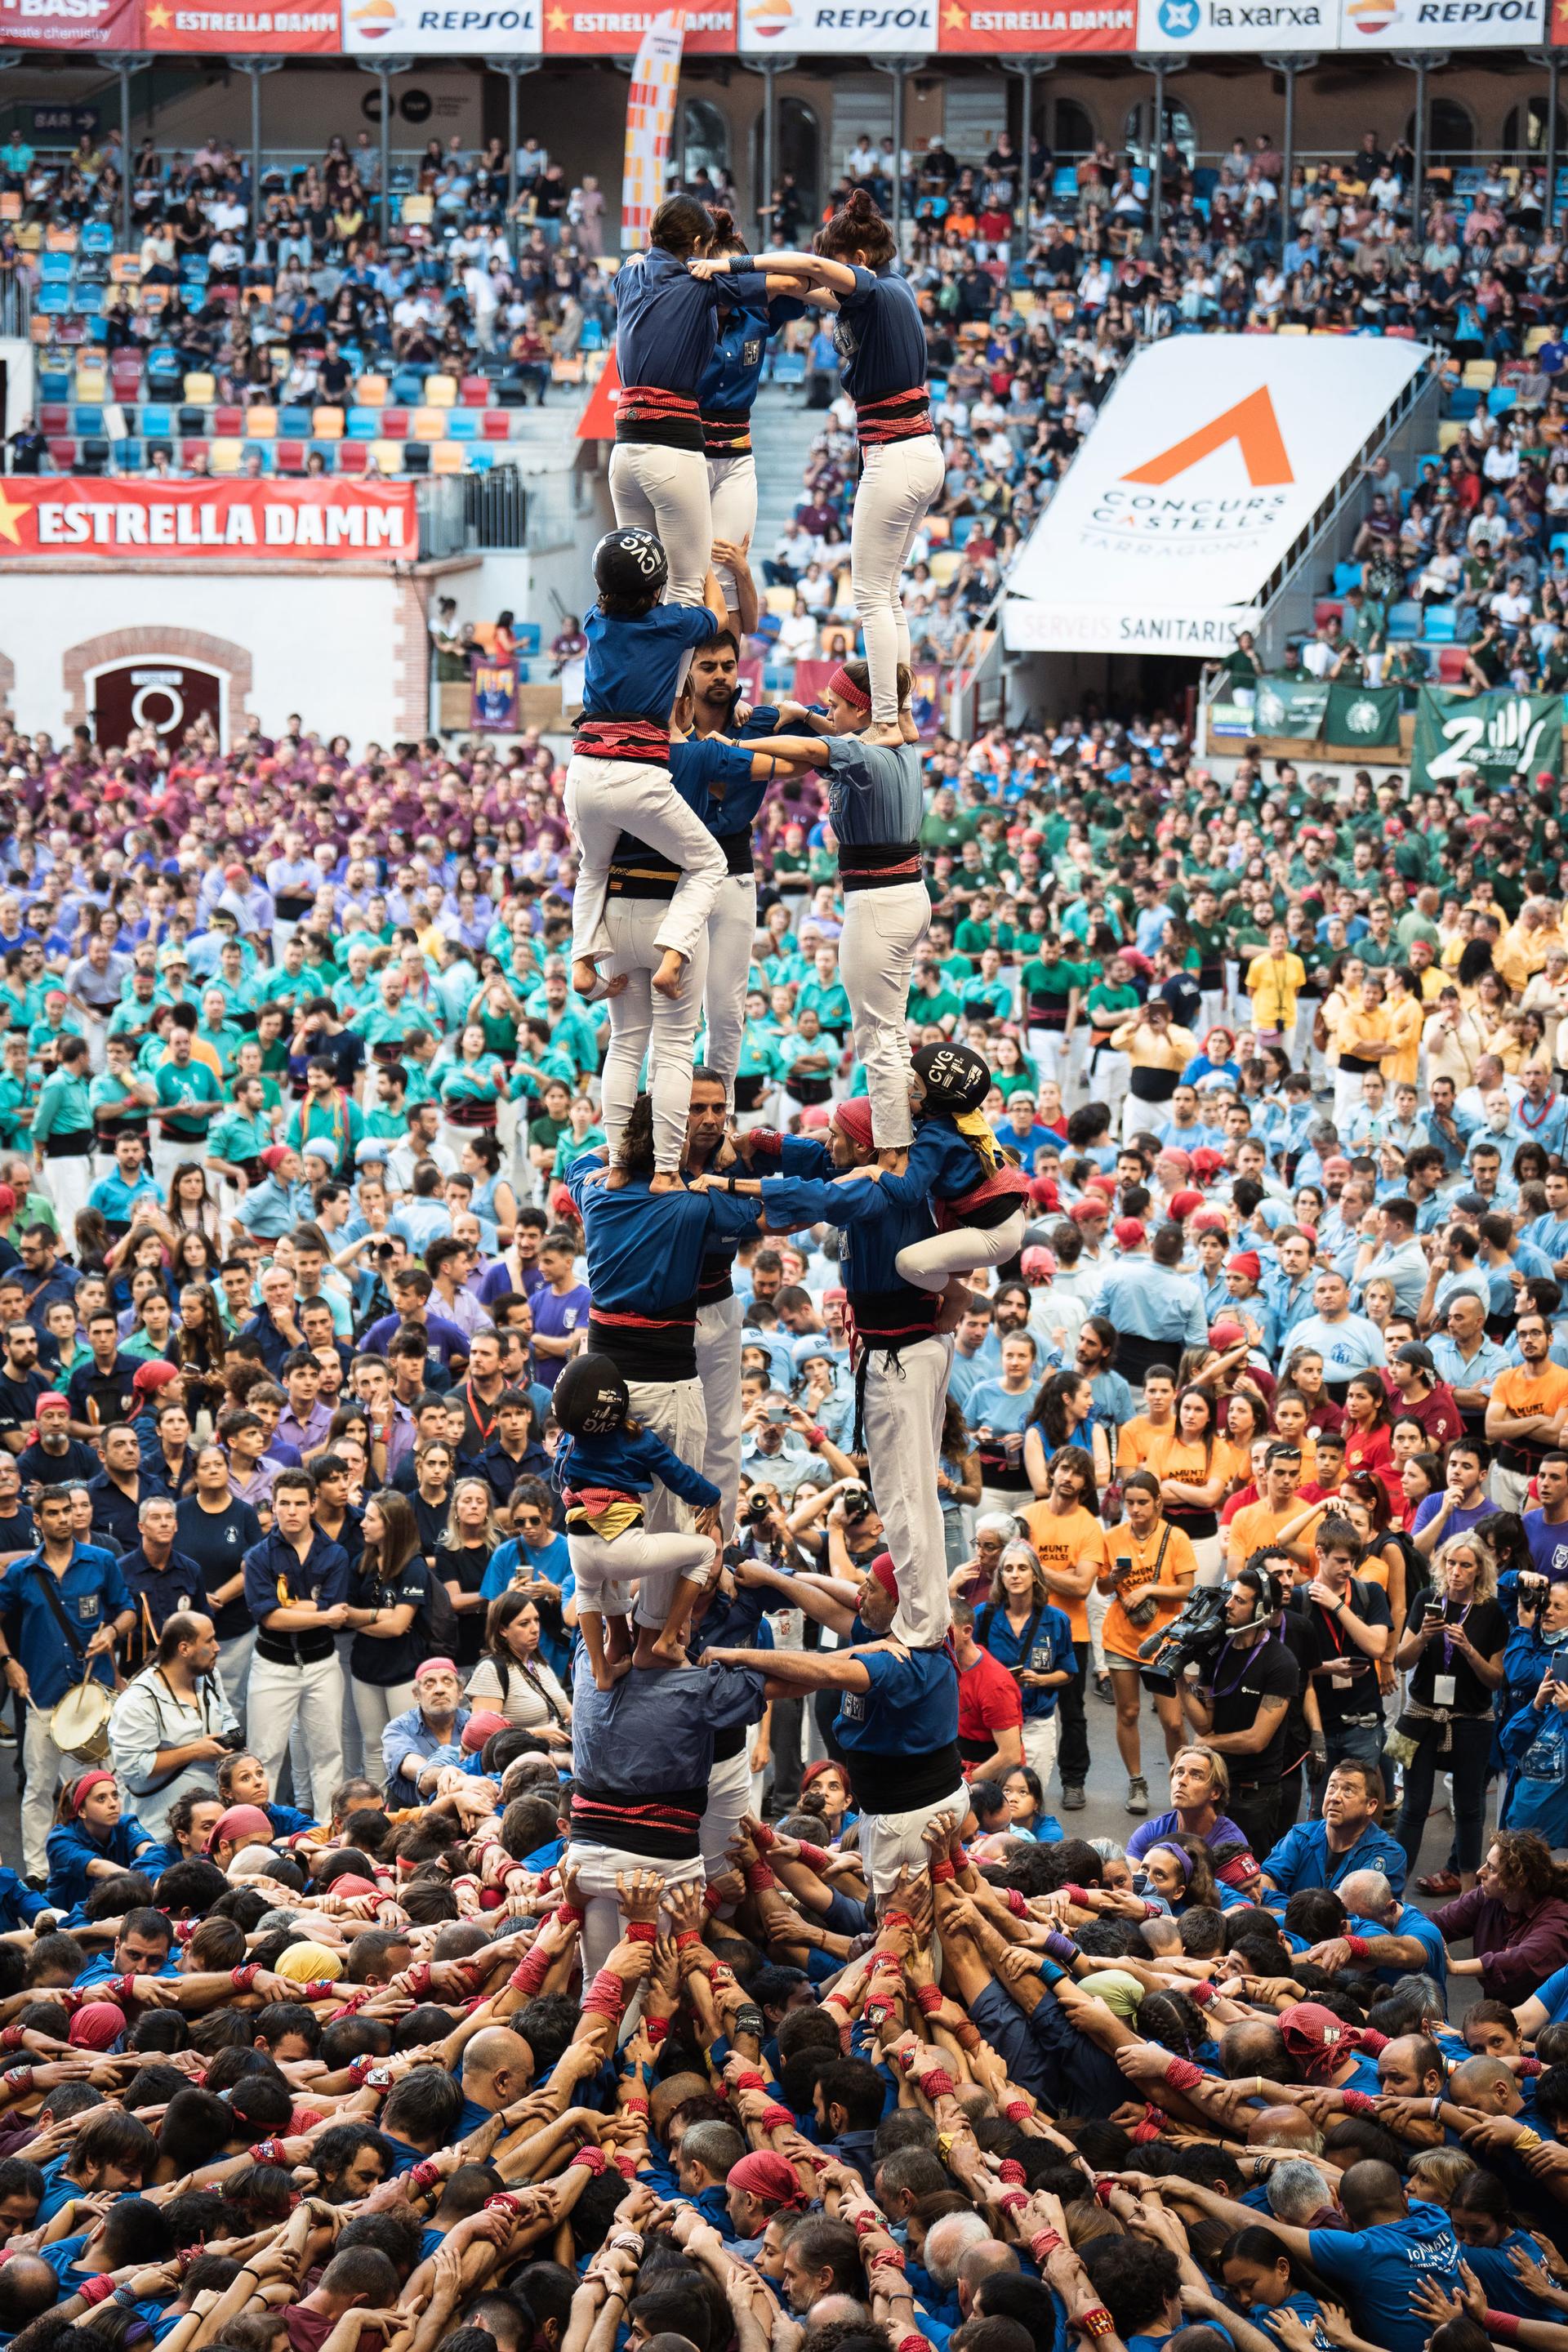 Castellers de la Vila de Gràcia team competes in a human tower competition, with towers reaching up more than 26 feet in the air.